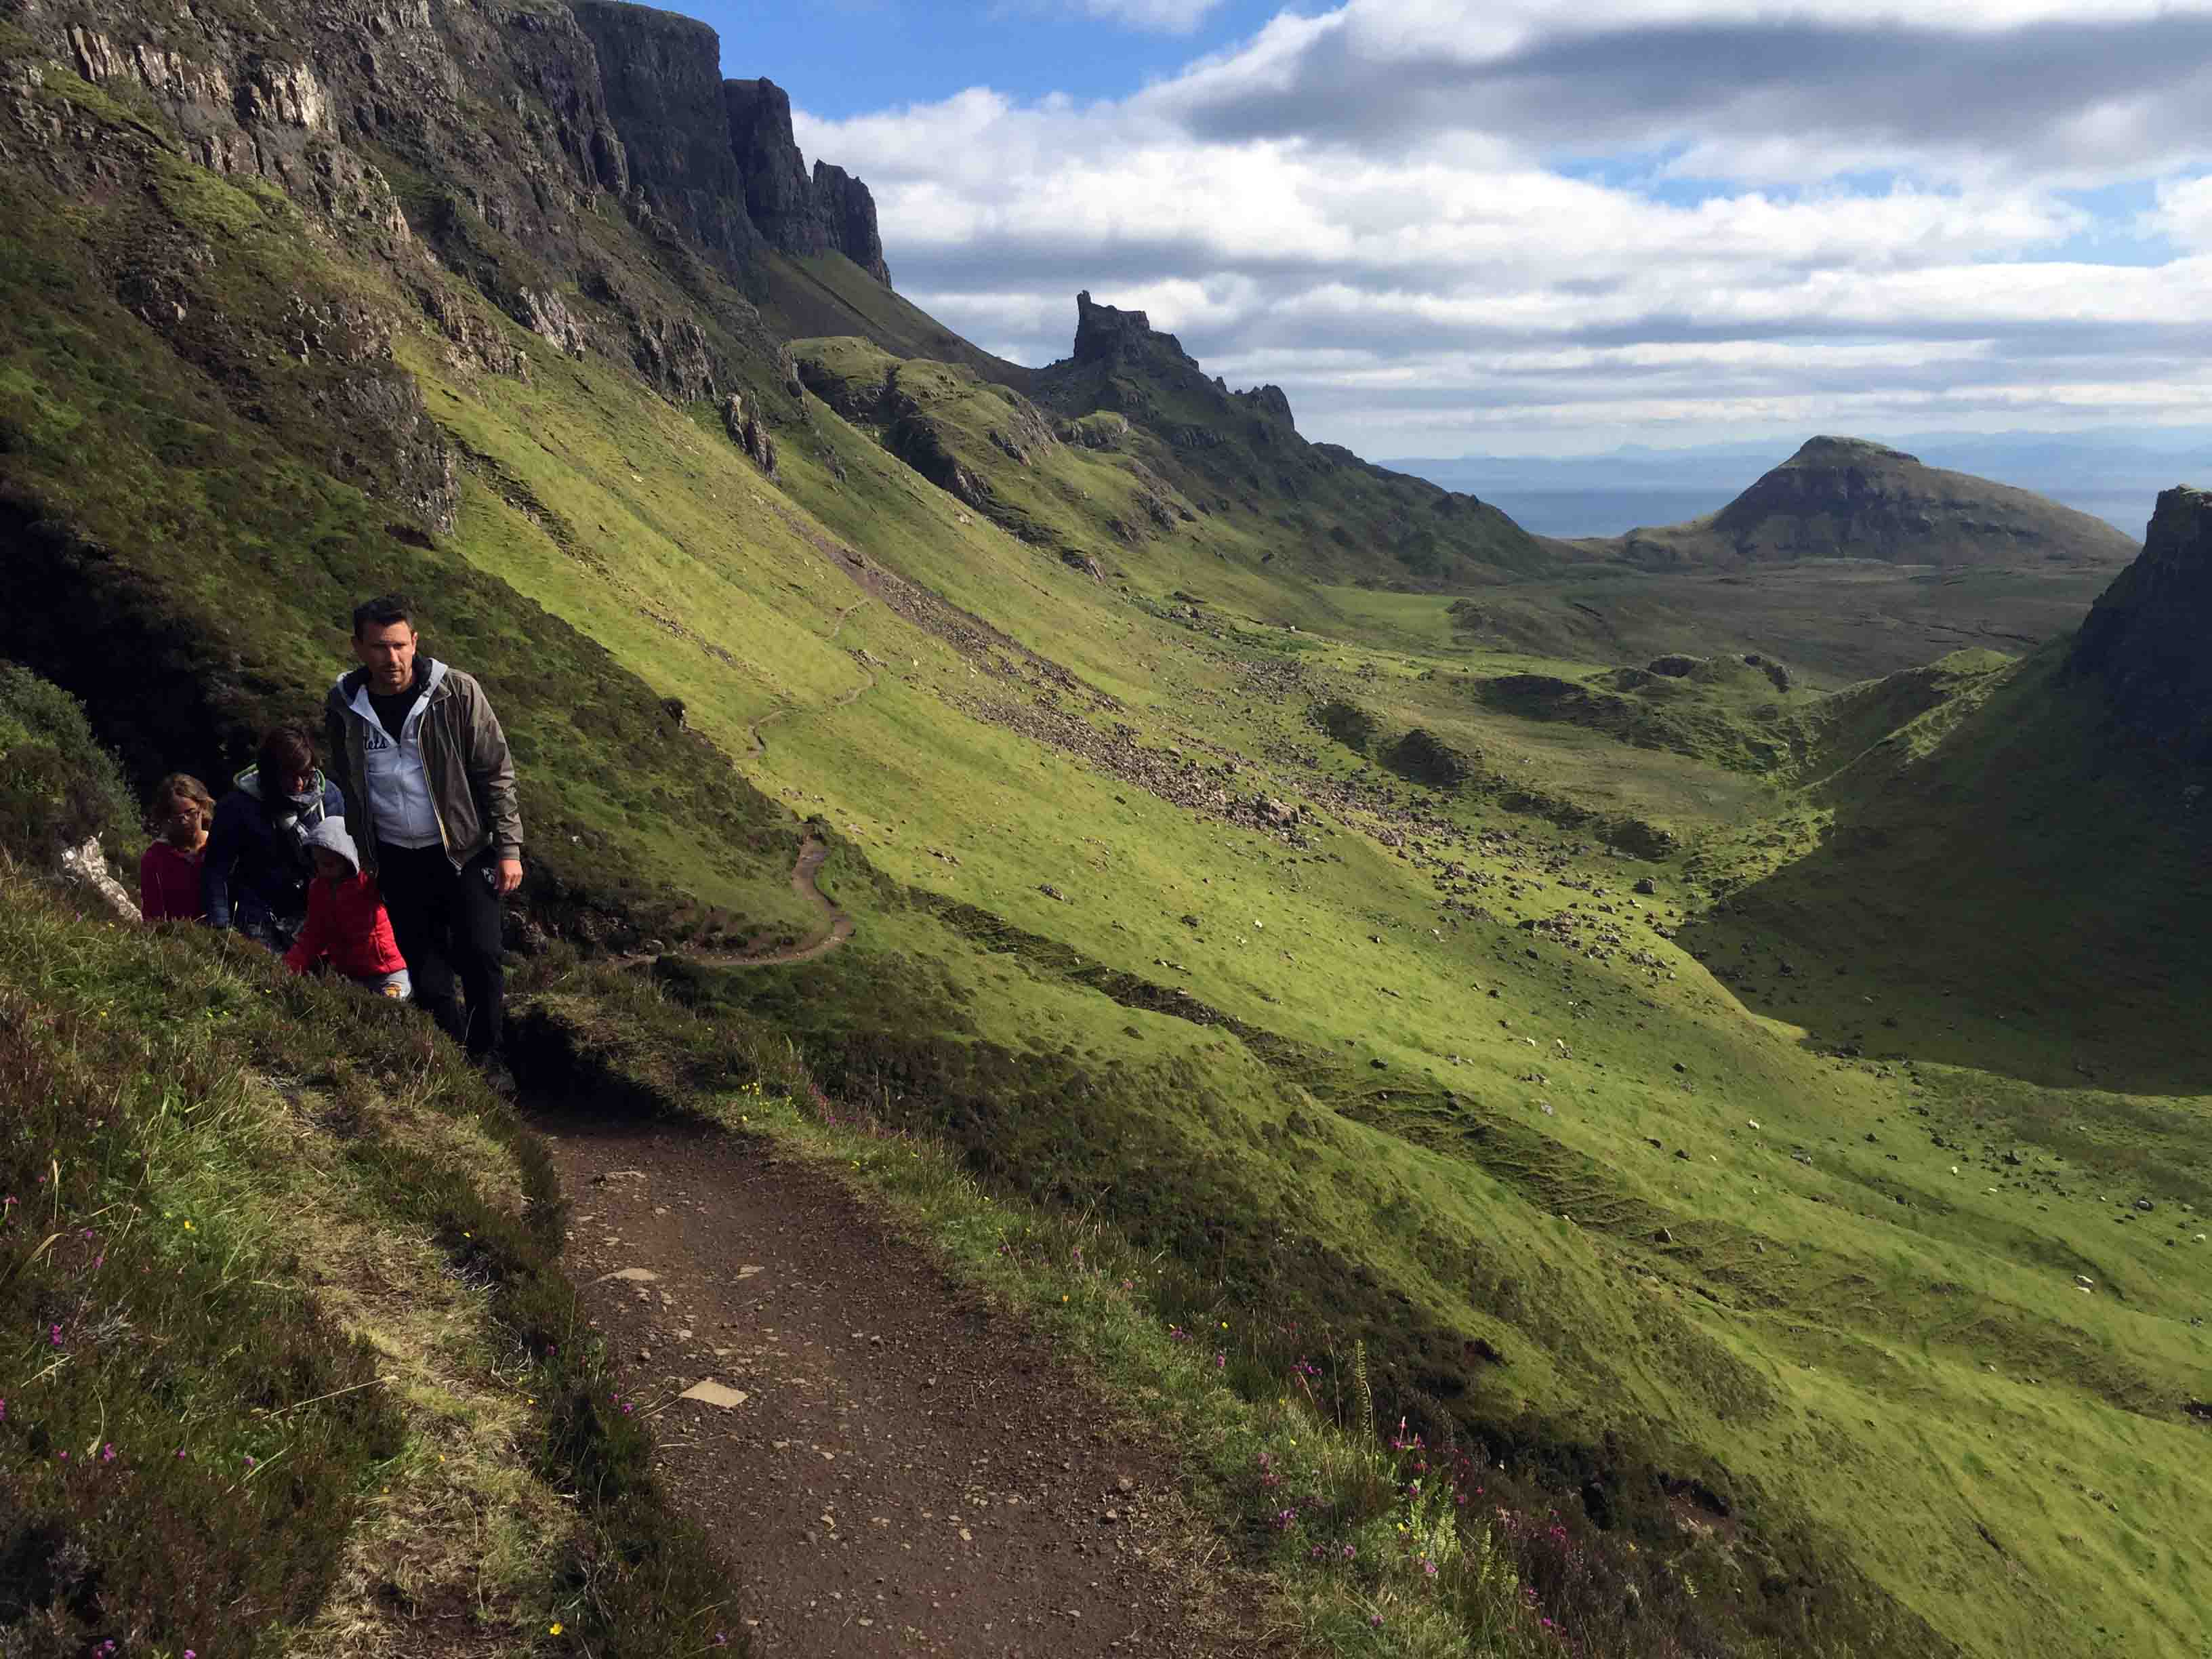 Now Is The Time To Visit Scotland: 6 Reasons To Go Soon